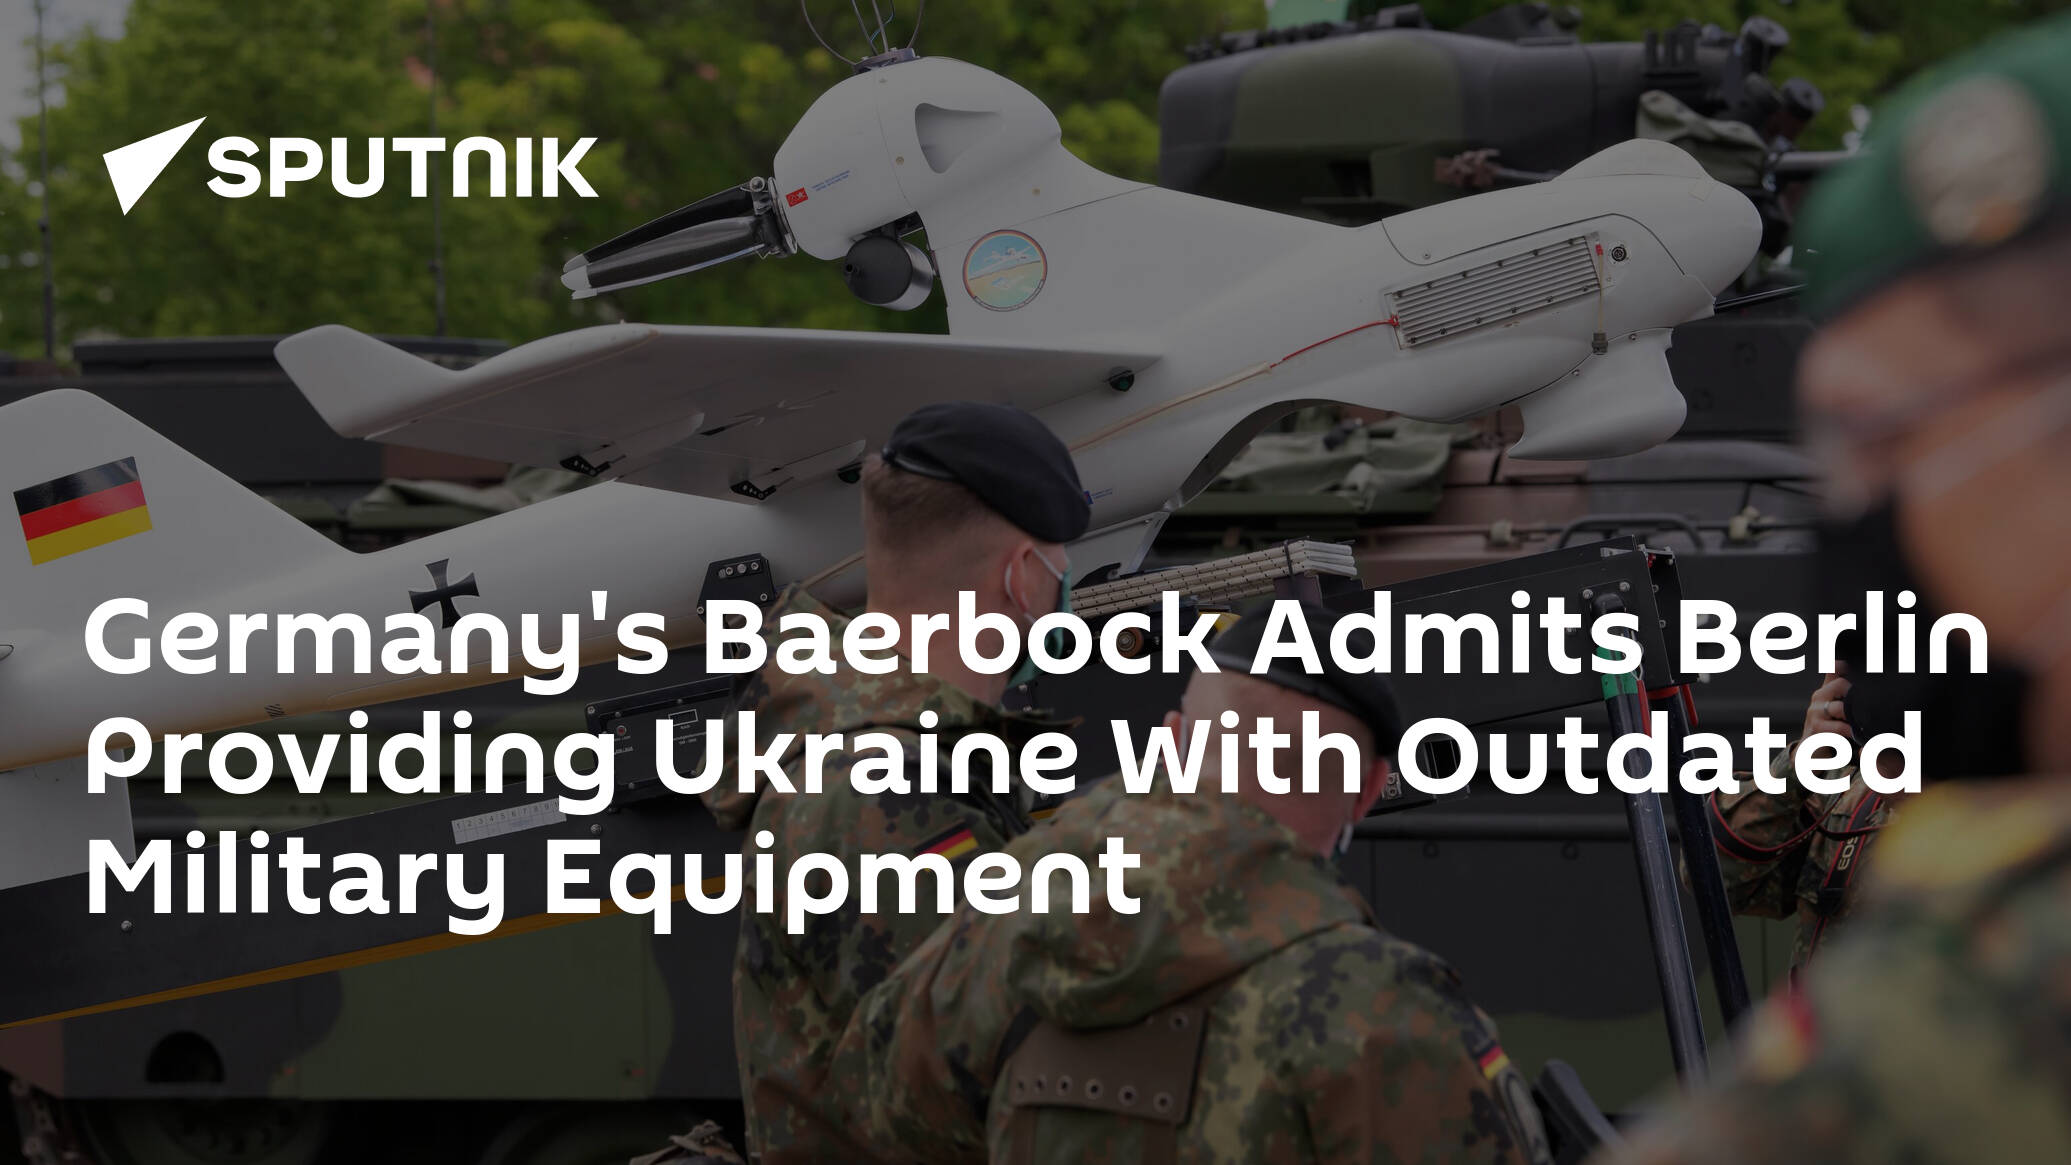 Germany's Baerbock Admits Berlin Providing Ukraine With Outdated Military Equipment